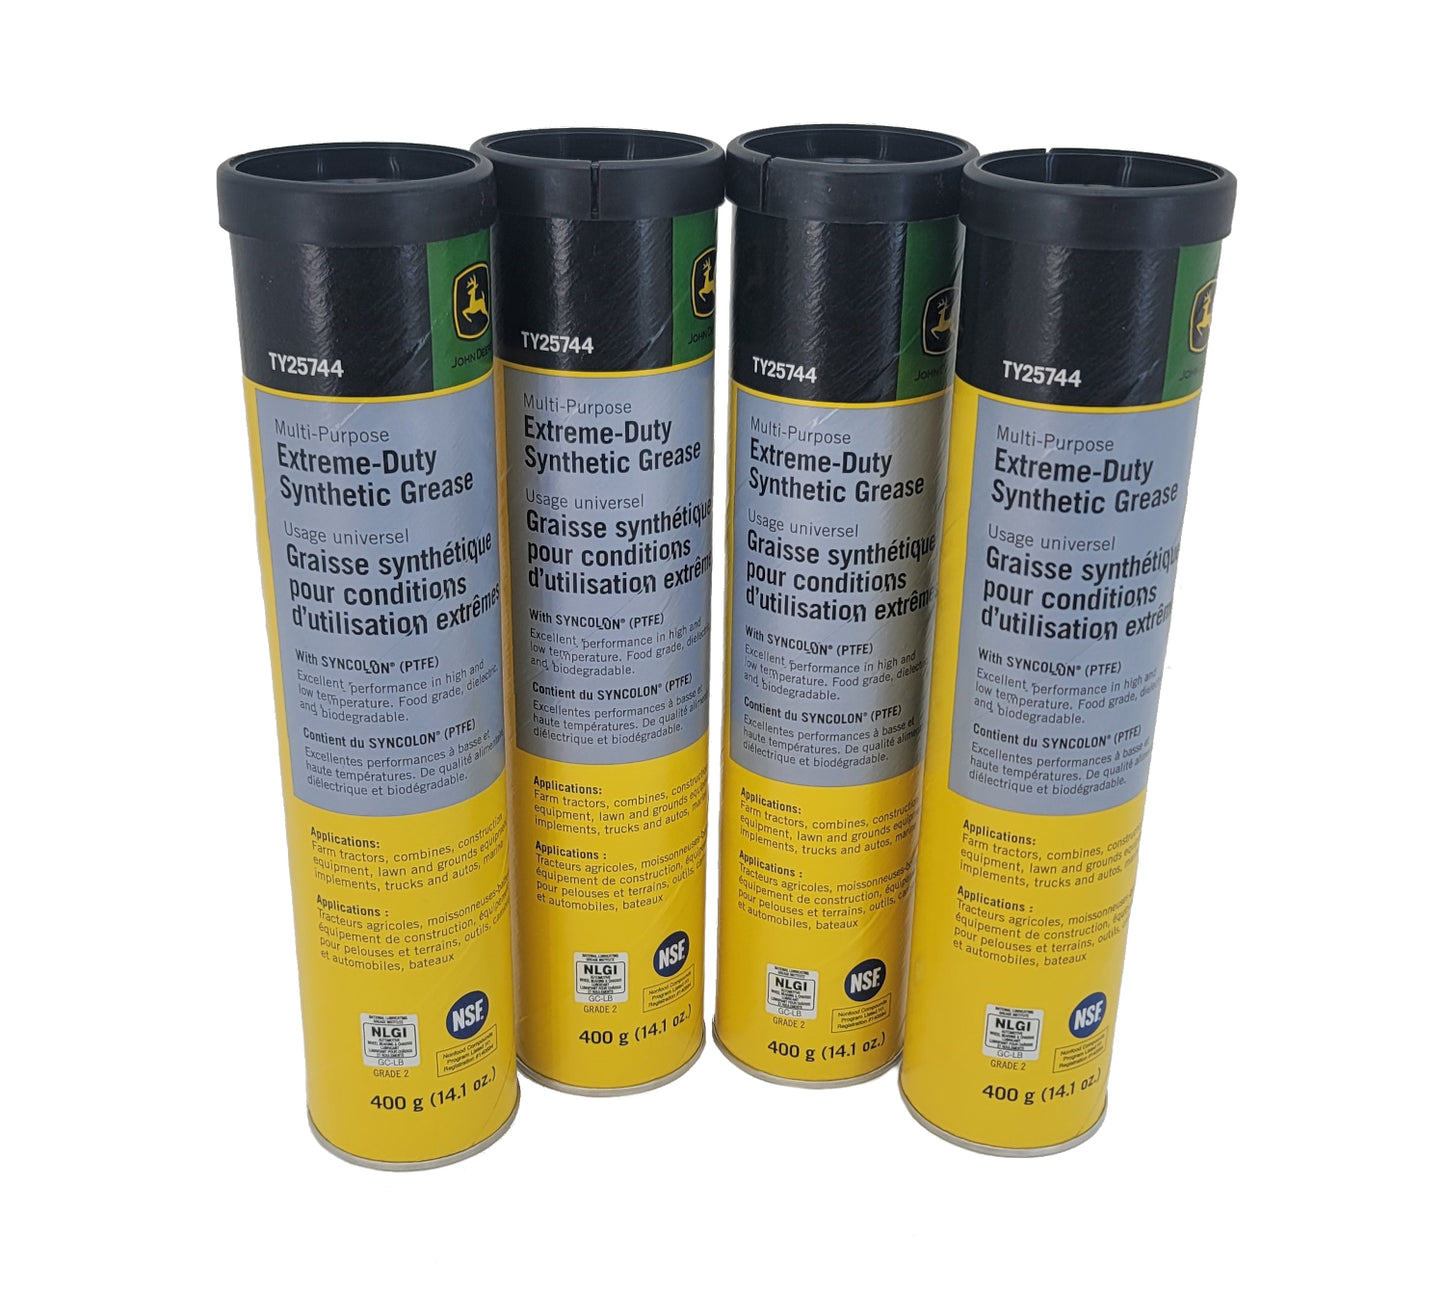 John Deere Original Equipment (4 PACK) Extreme-Duty Synthetic Grease - TY25744